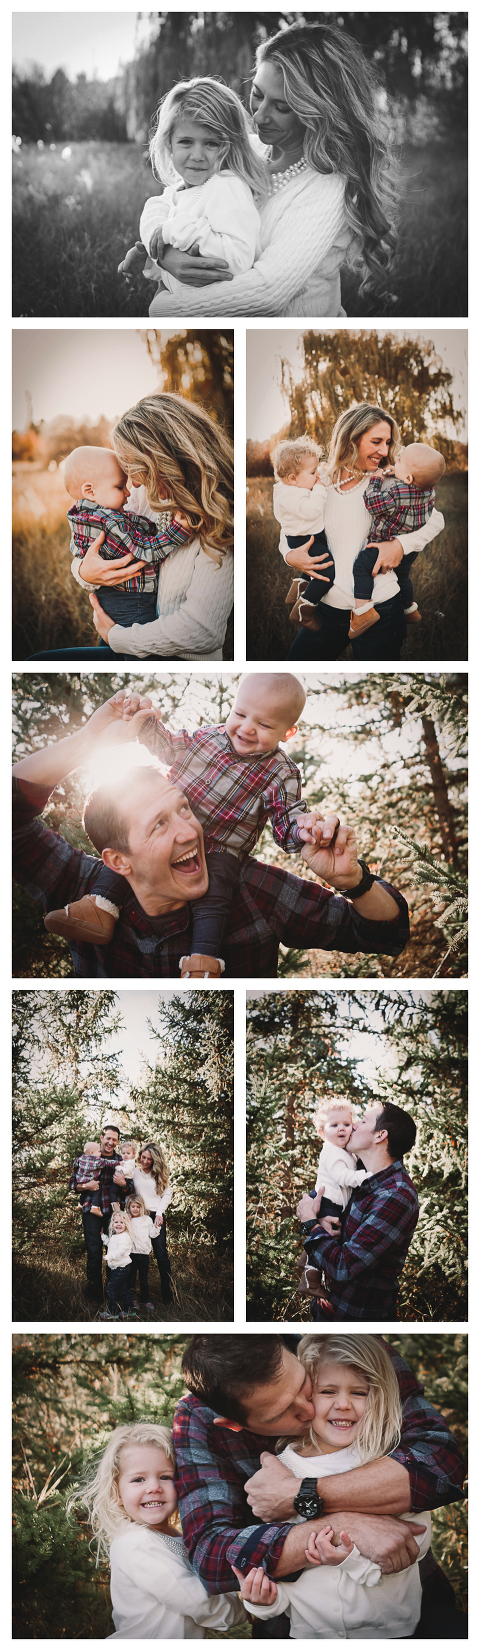 Taylor Family, Lifestyle session captured by Hailey Haberman, Ellensburg, WA